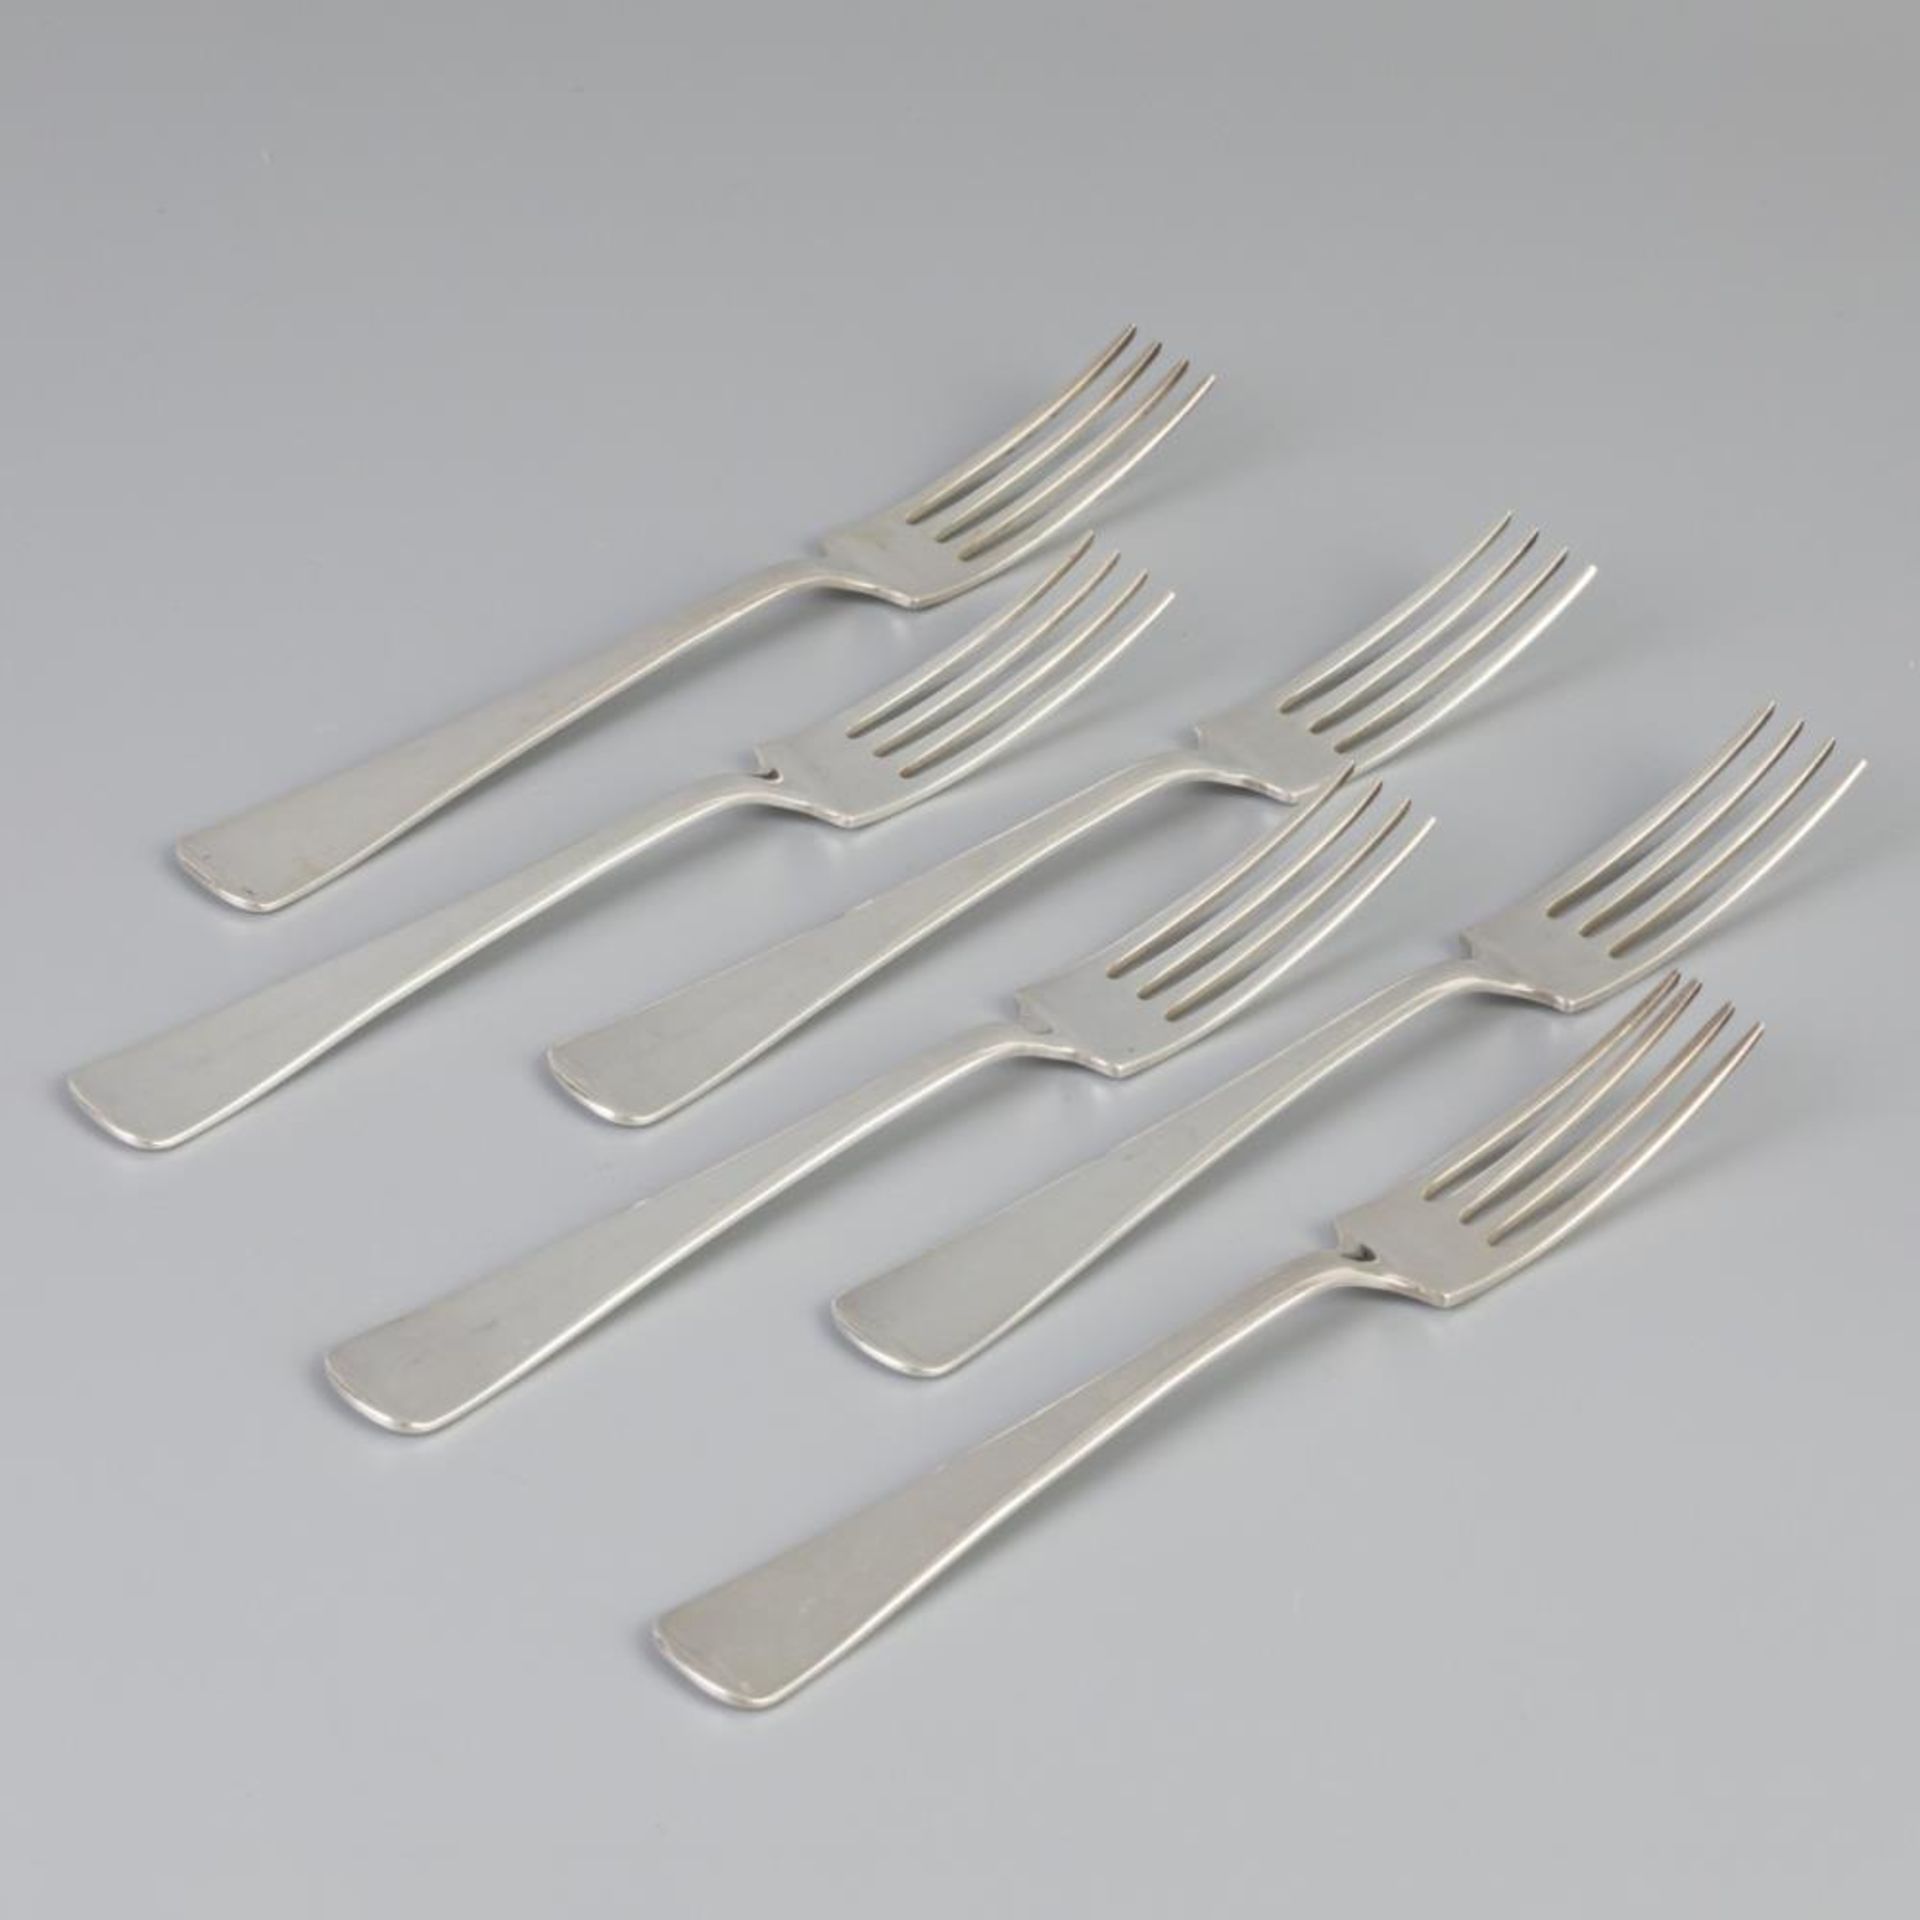 6 piece set of forks "Haags Lofje" silver.